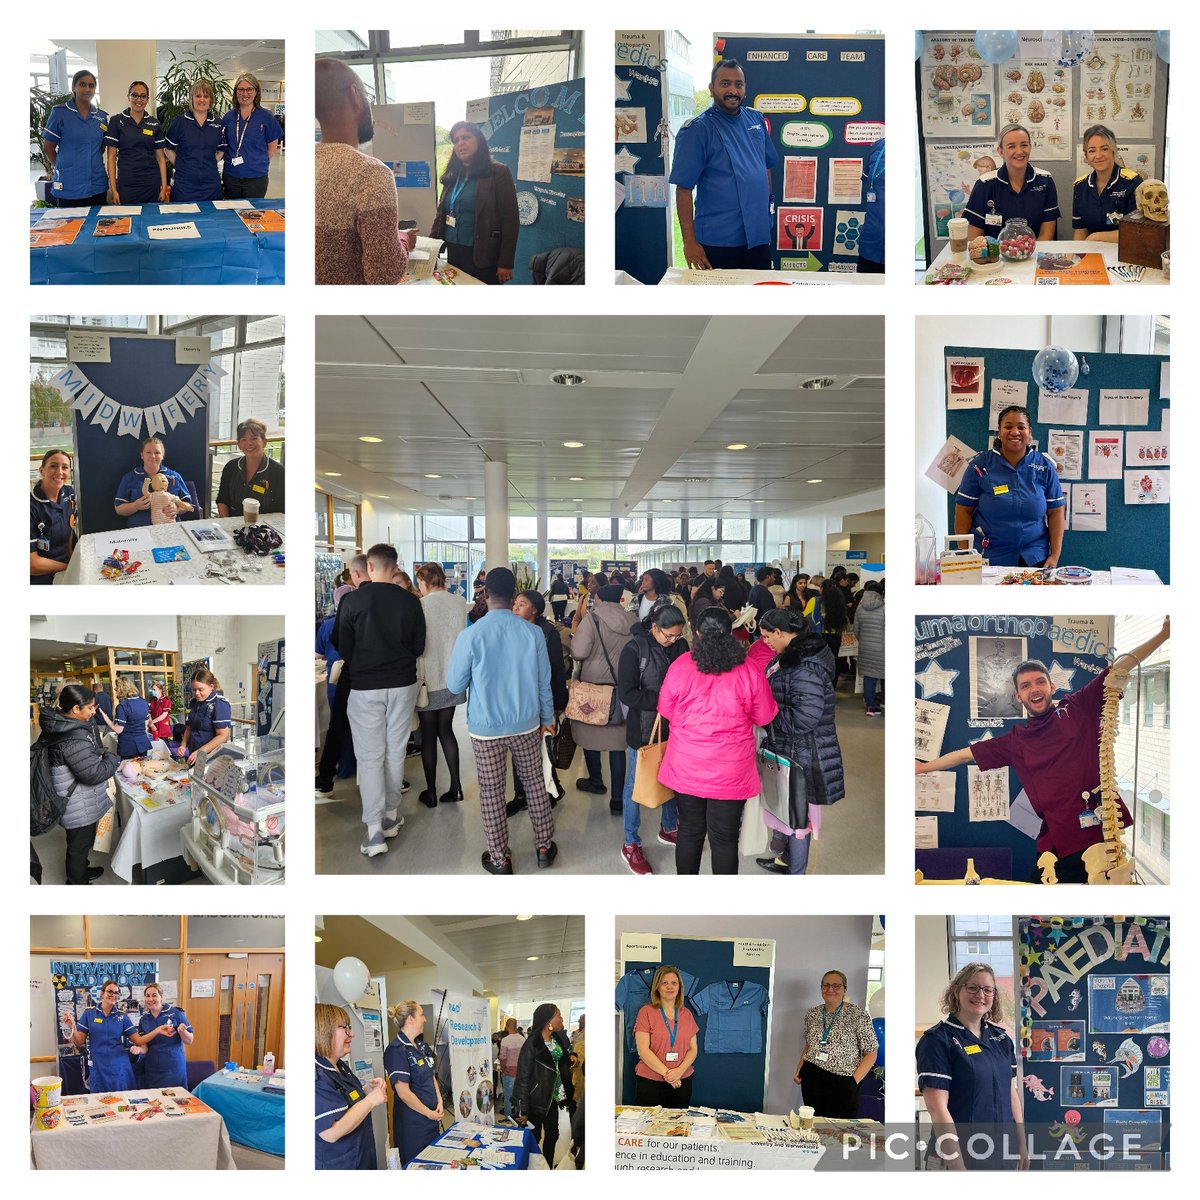 Fantastic turnout out @nhsuhcw recruitment open day. A big thank you to all staff who represented their specialities today and welcomed some potential new staff. @paula_seery @Heather_Price09